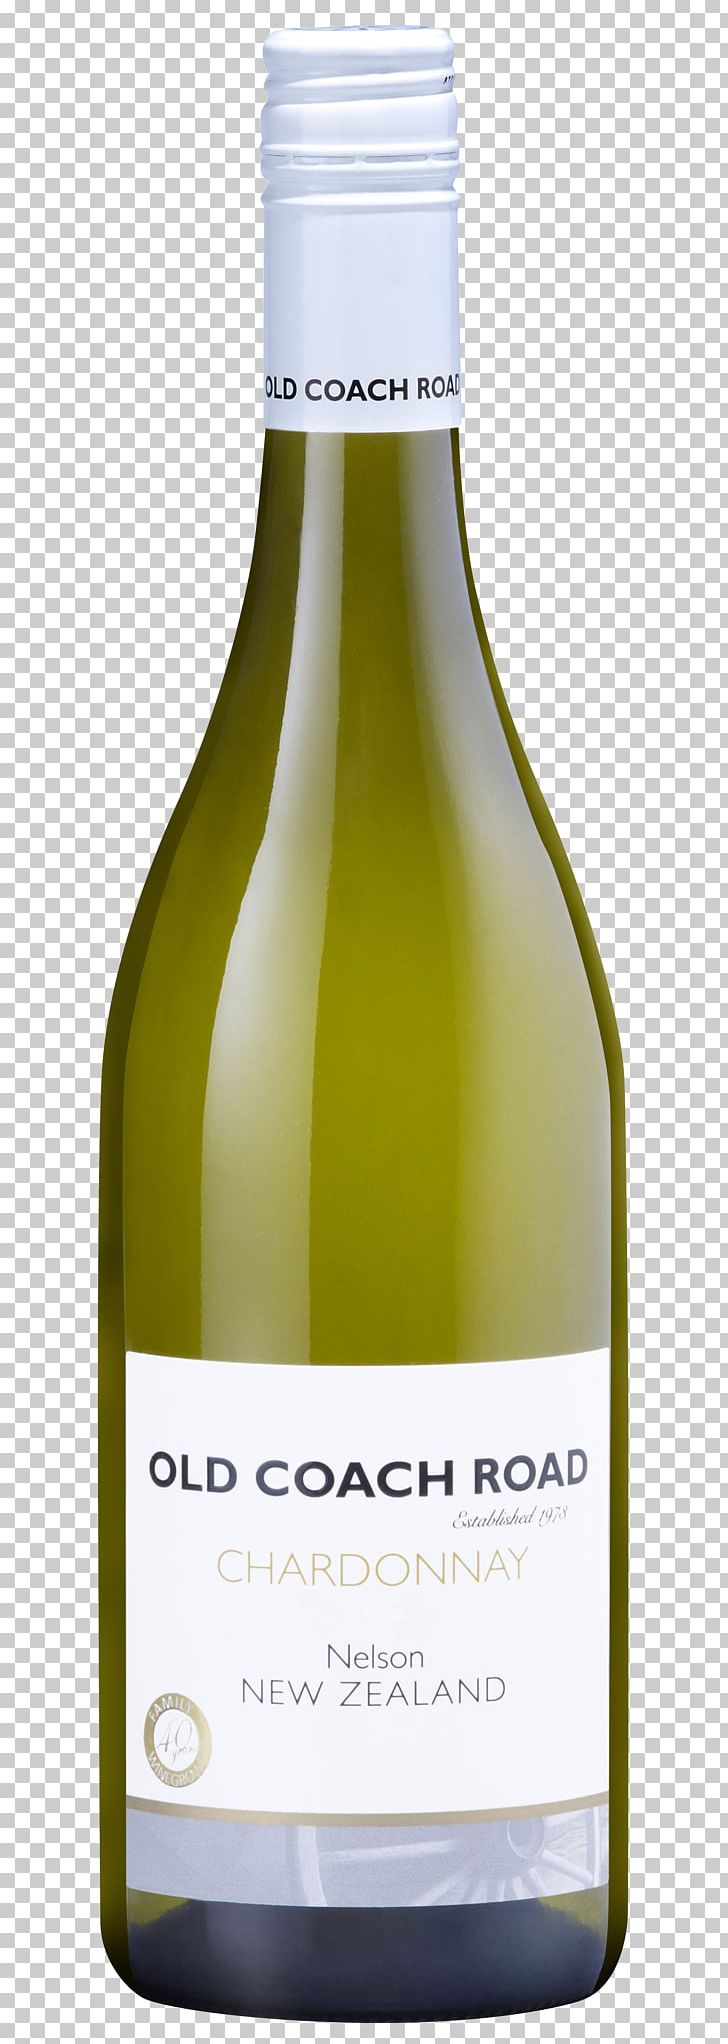 White Wine Sauvignon Blanc Riesling Trockenbeerenauslese PNG, Clipart, Alcoholic Beverage, Bottle, Champagne, Chardonnay, Drink Free PNG Download